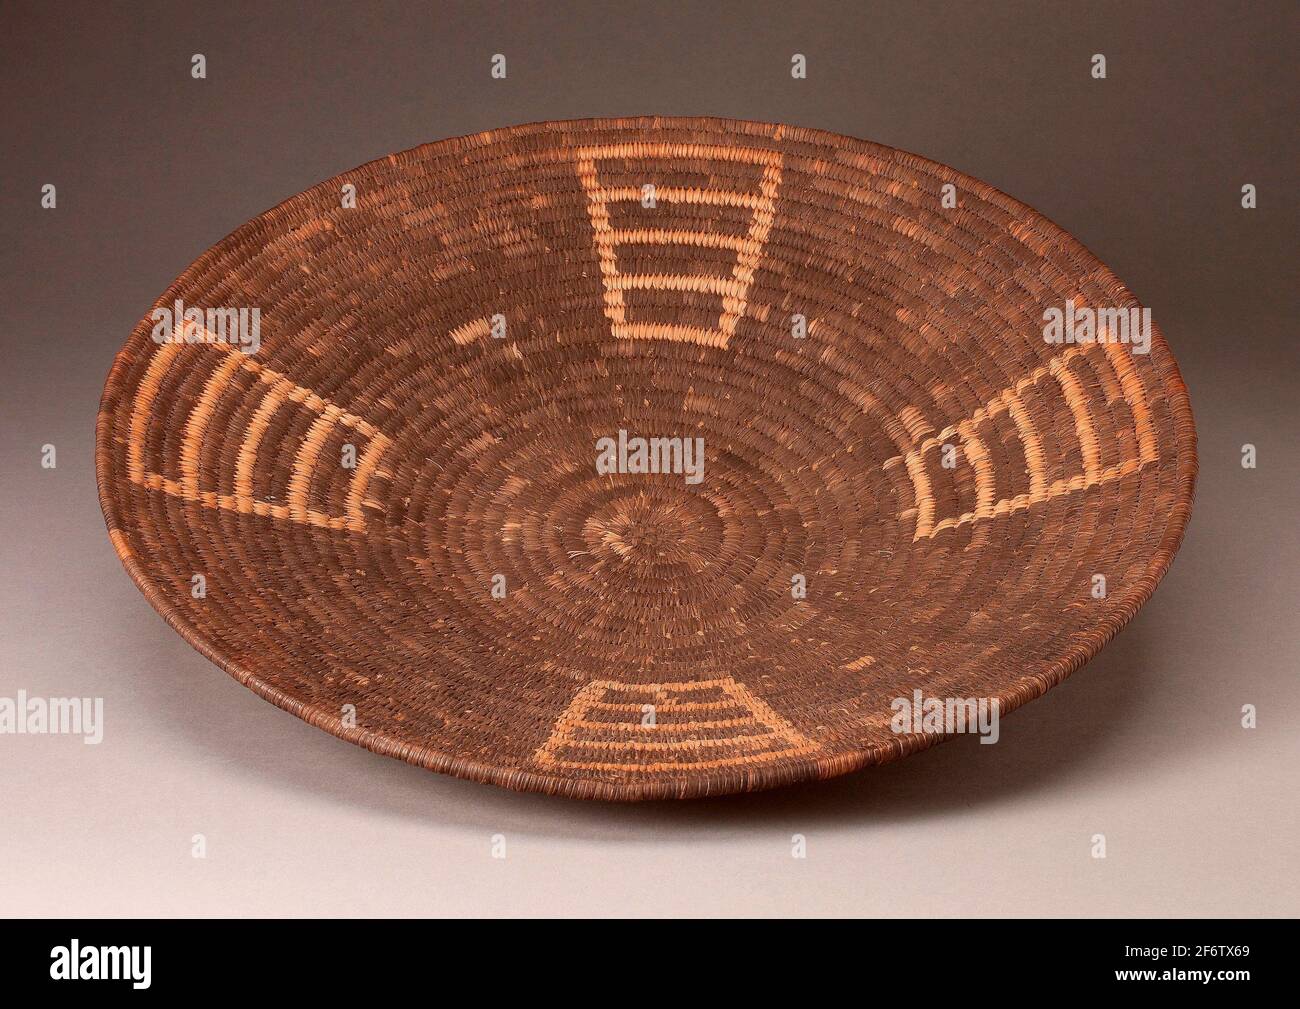 Papago. Shallow Basketry Bowl with Four Ladder-like Designs Radiating from Center-Late 19th/early 20th century-Papago (Tohono O-odham) Arizona, Stock Photo